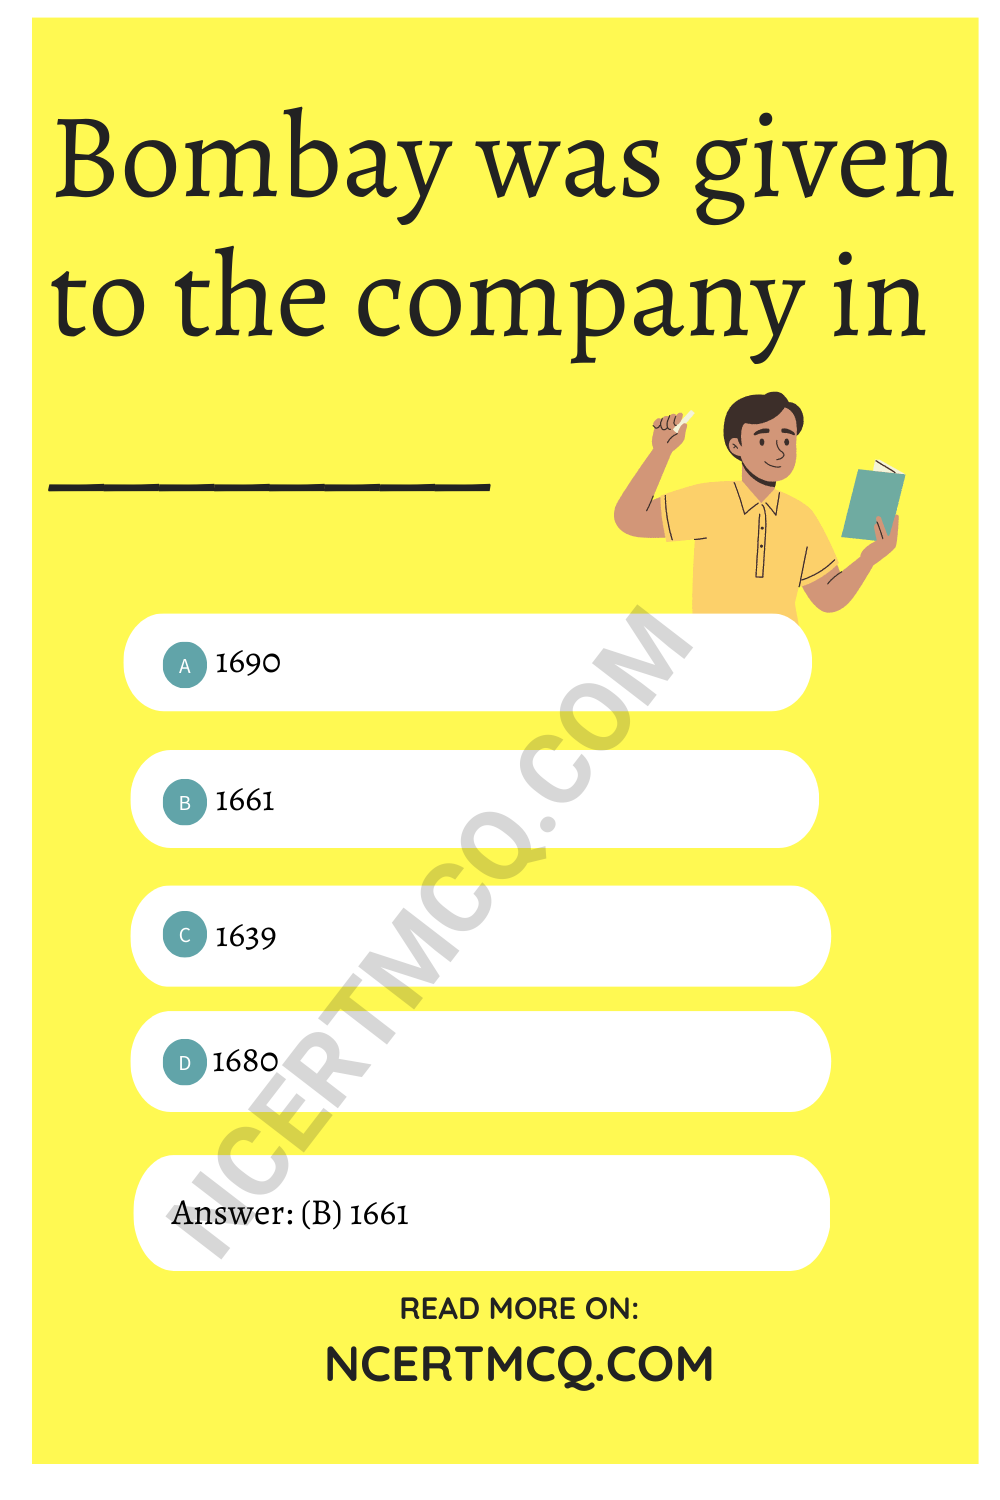 Bombay was given to the company in ________